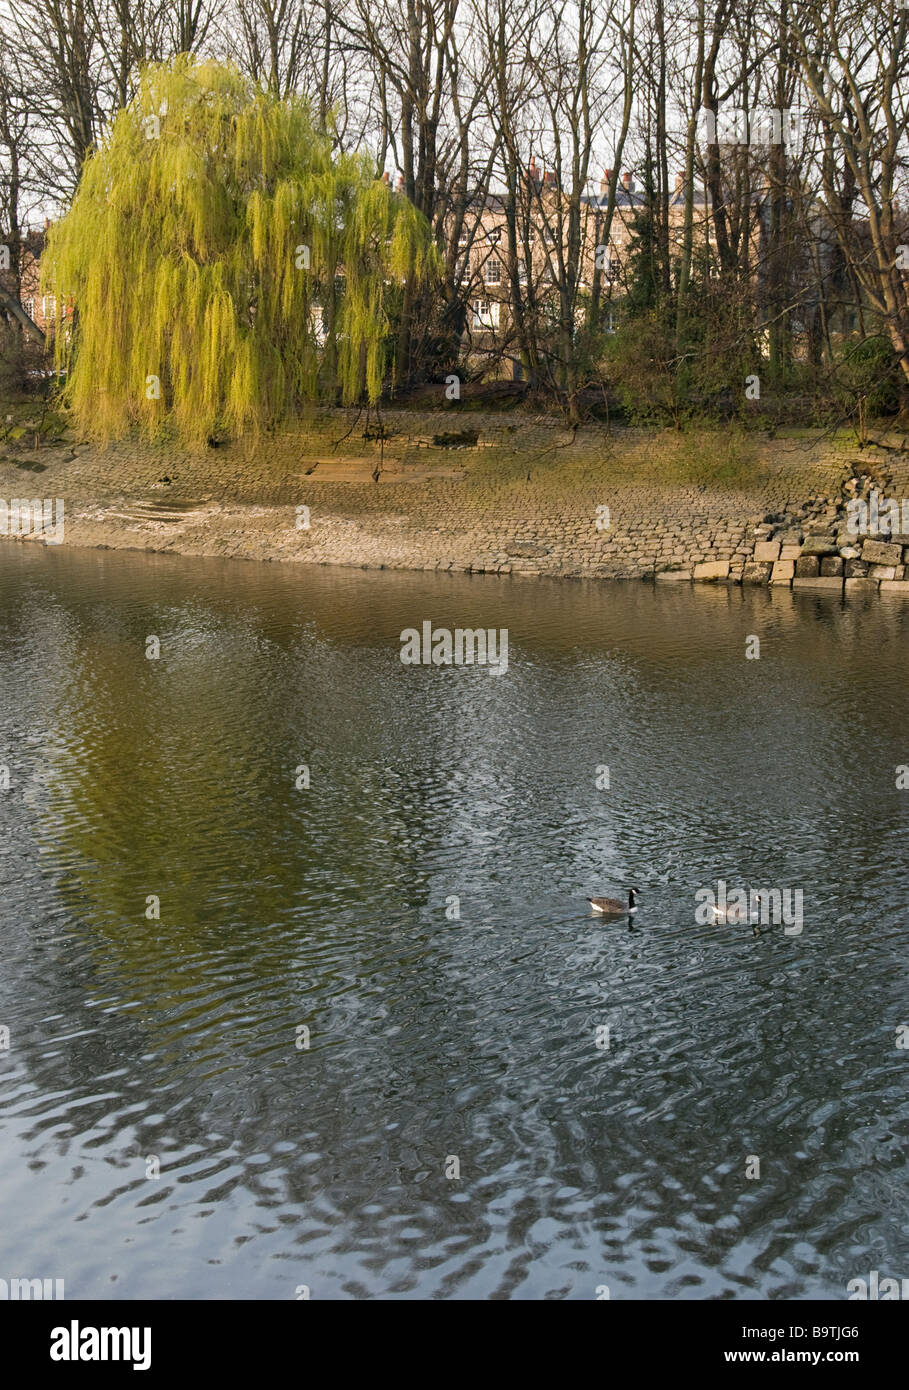 Willow tree on the bank of the River Thames with Canadian Geese Stock Photo